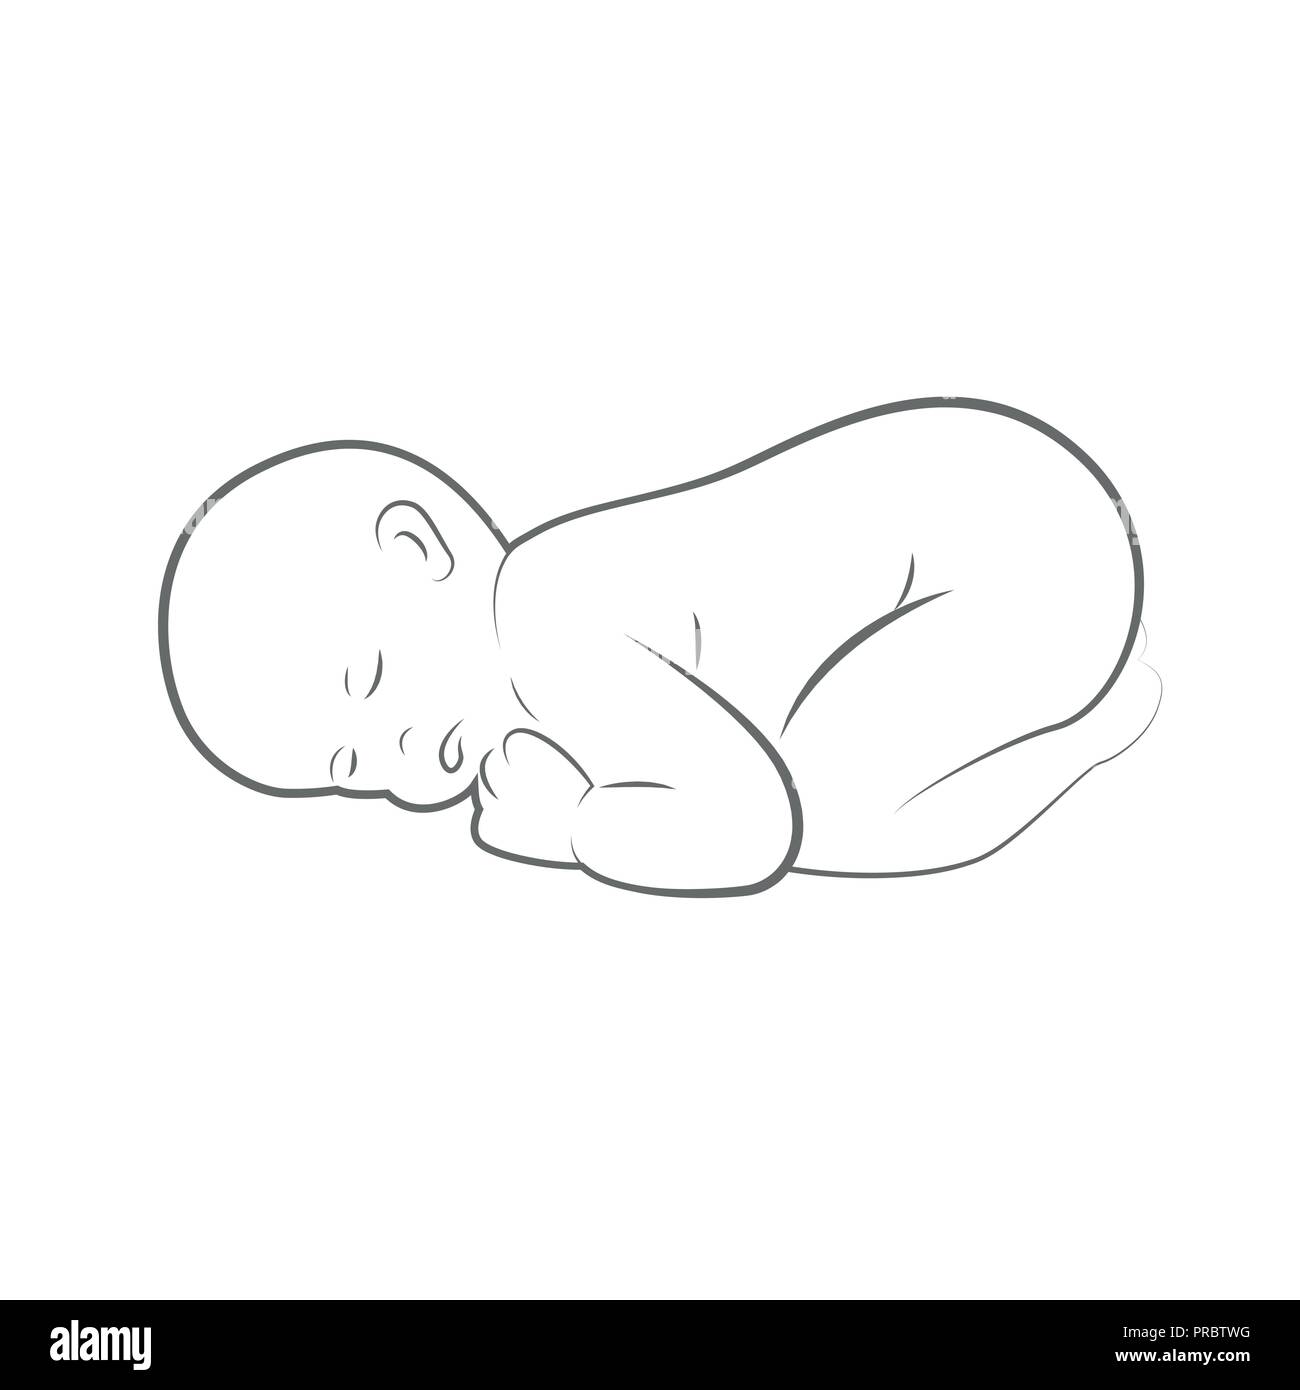 Vector Illustration Sketch Father With A Small Baby. Dad And Newborn Baby  On An Isolated White Background. Doodle Hand-drawn Line Drawing. Man  Holding Infant. Side View Of The Profile. Royalty Free SVG,